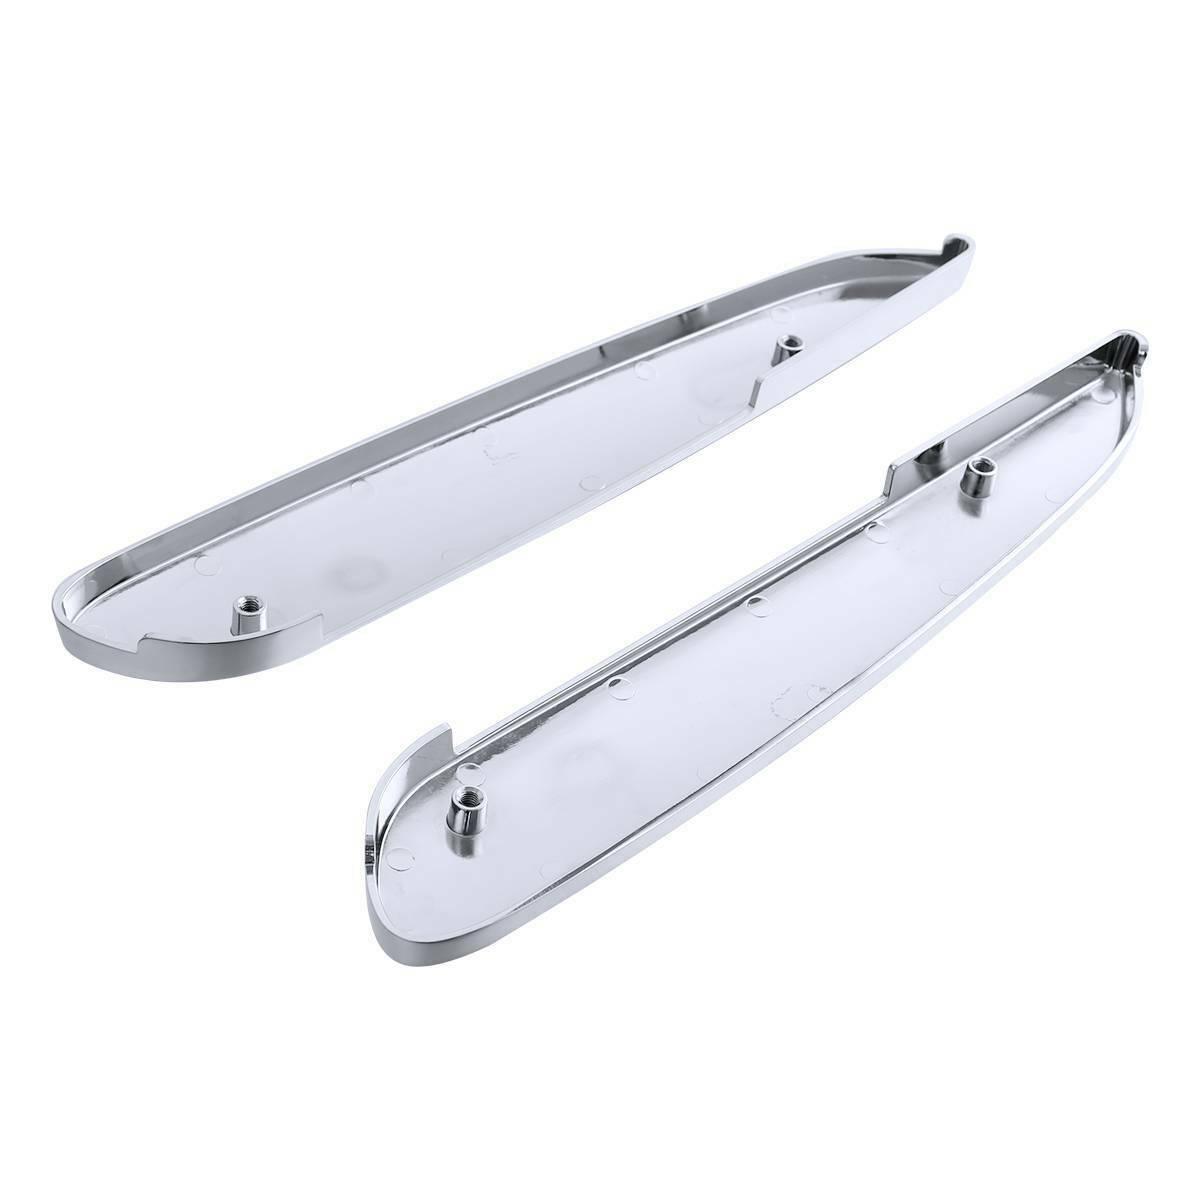 Pair Saddlebag Lock Hinges Fit For Indian chieftain dark horse limited 2019-2020 - Moto Life Products